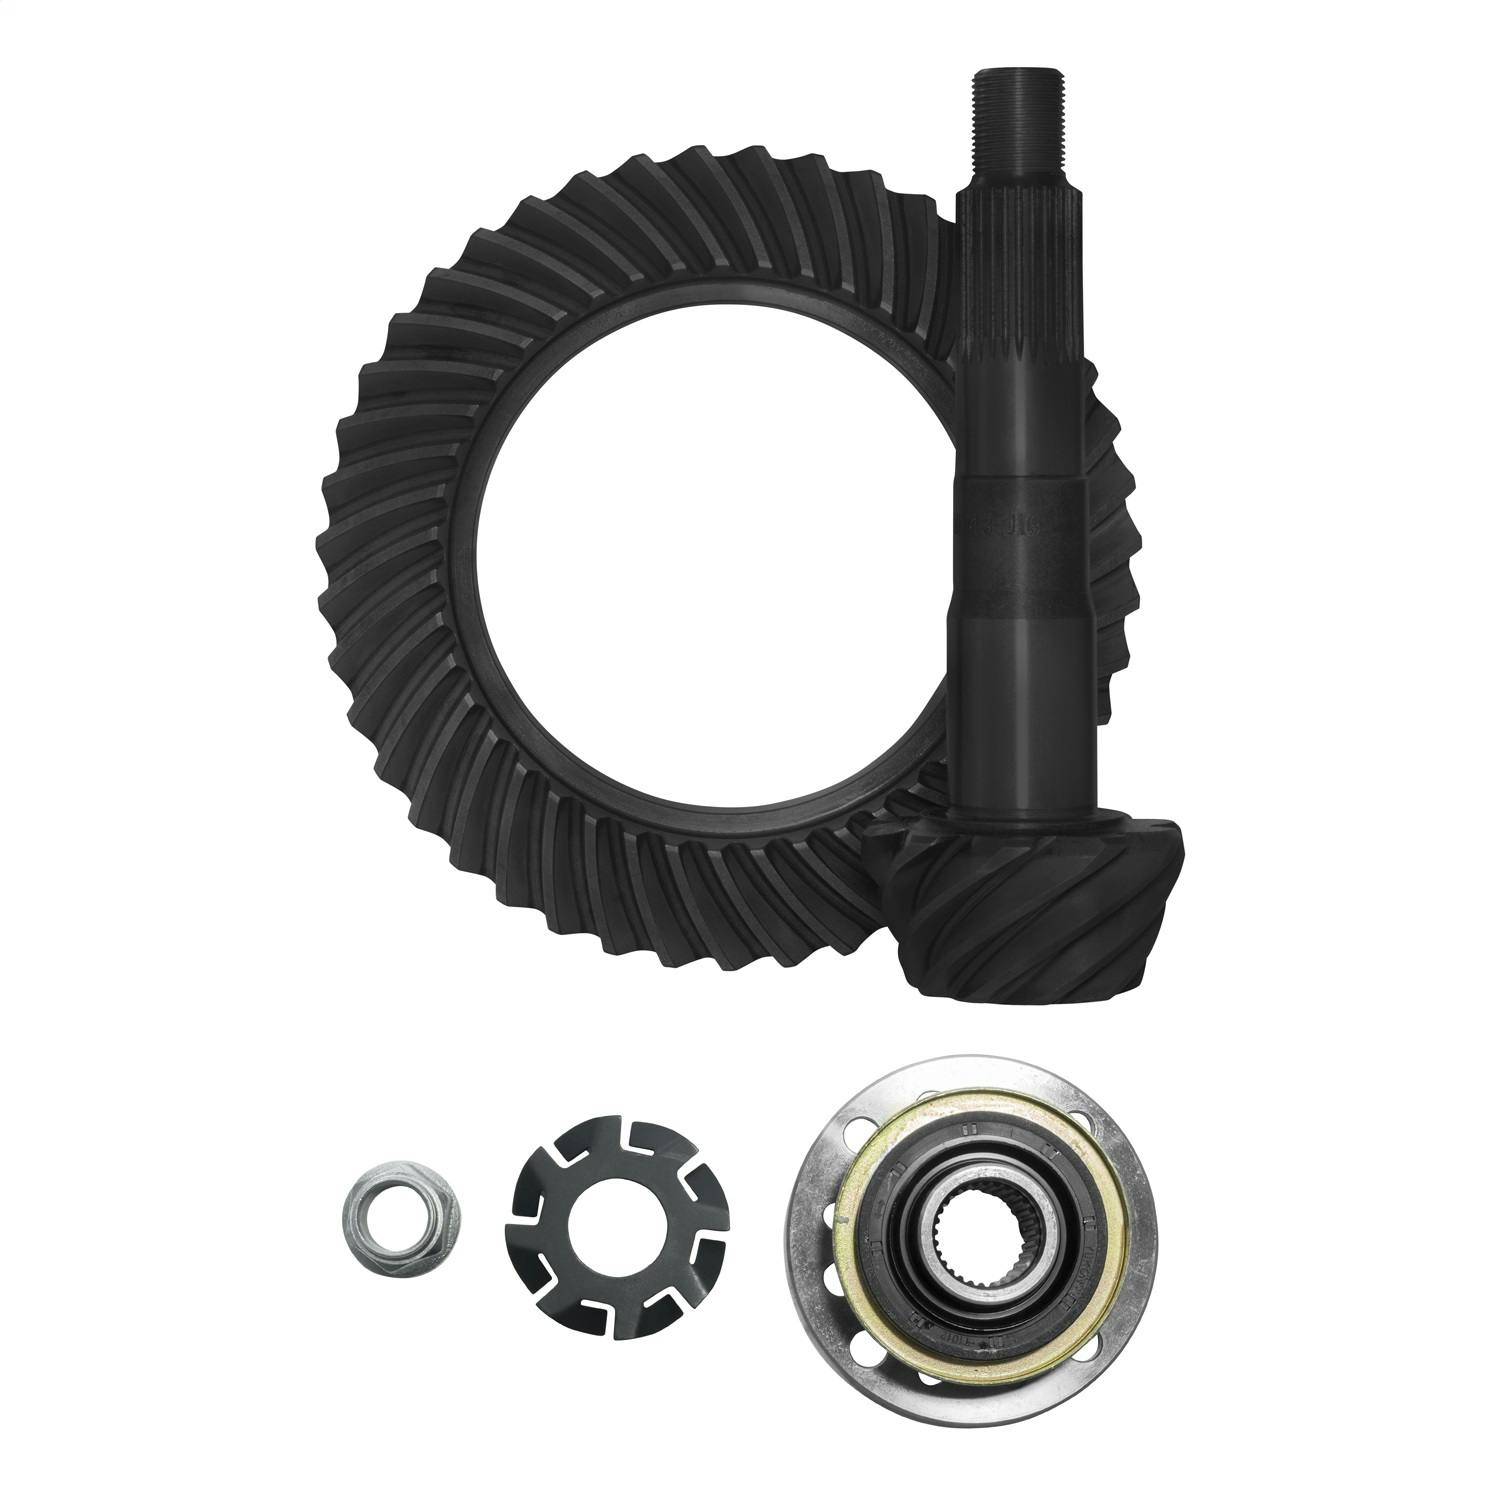 USA Standard Gear ZG TLCF-488RK Differential Ring and Pinion